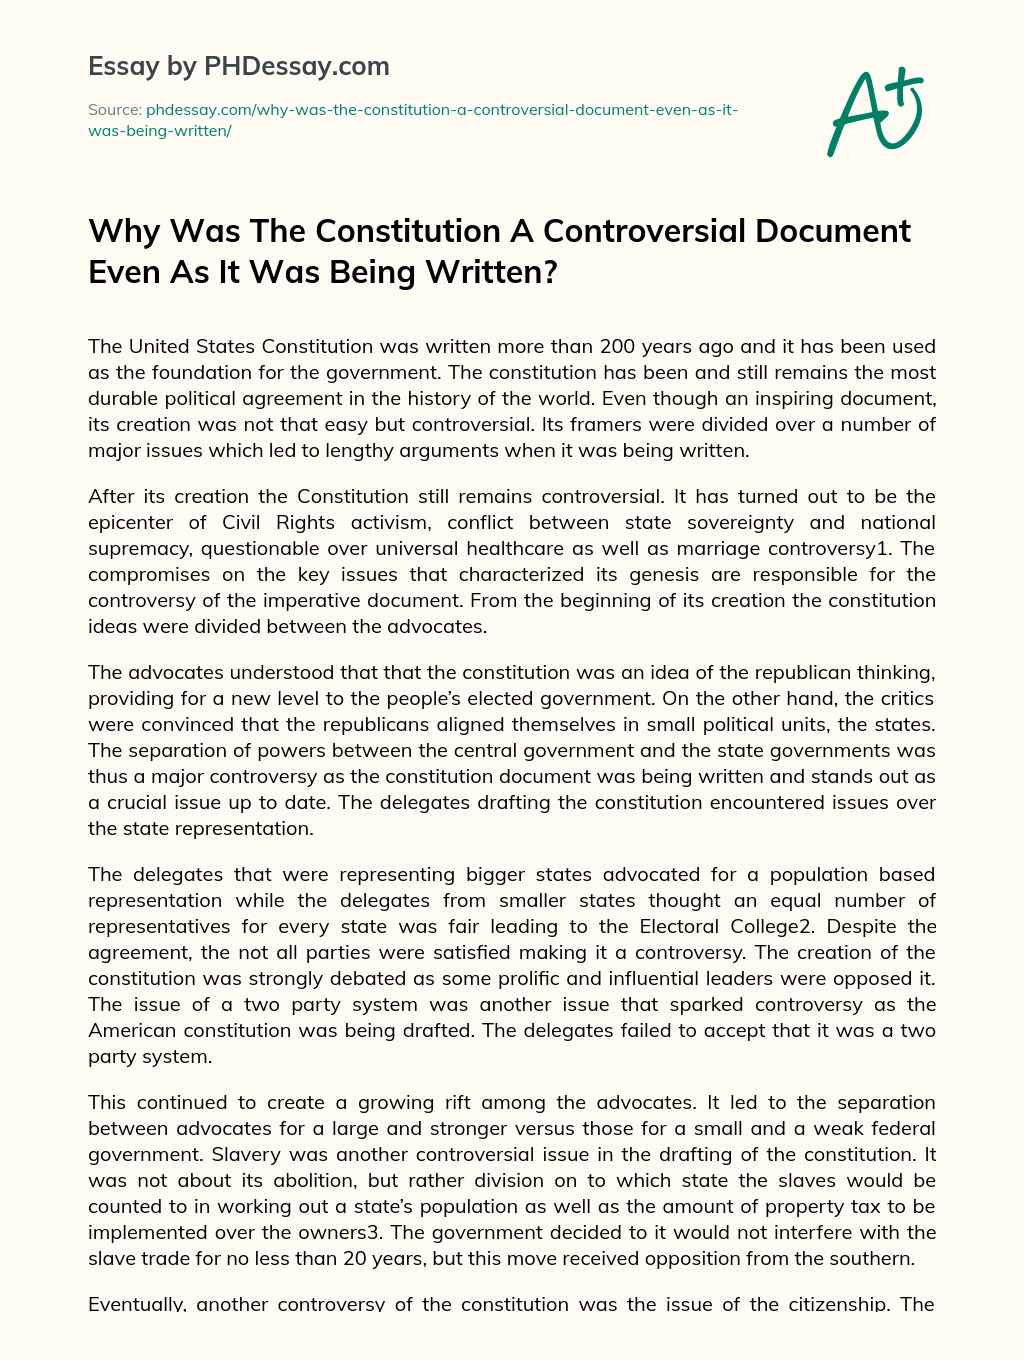 Why Was The Constitution A Controversial Document Even As It Was Being Written? essay